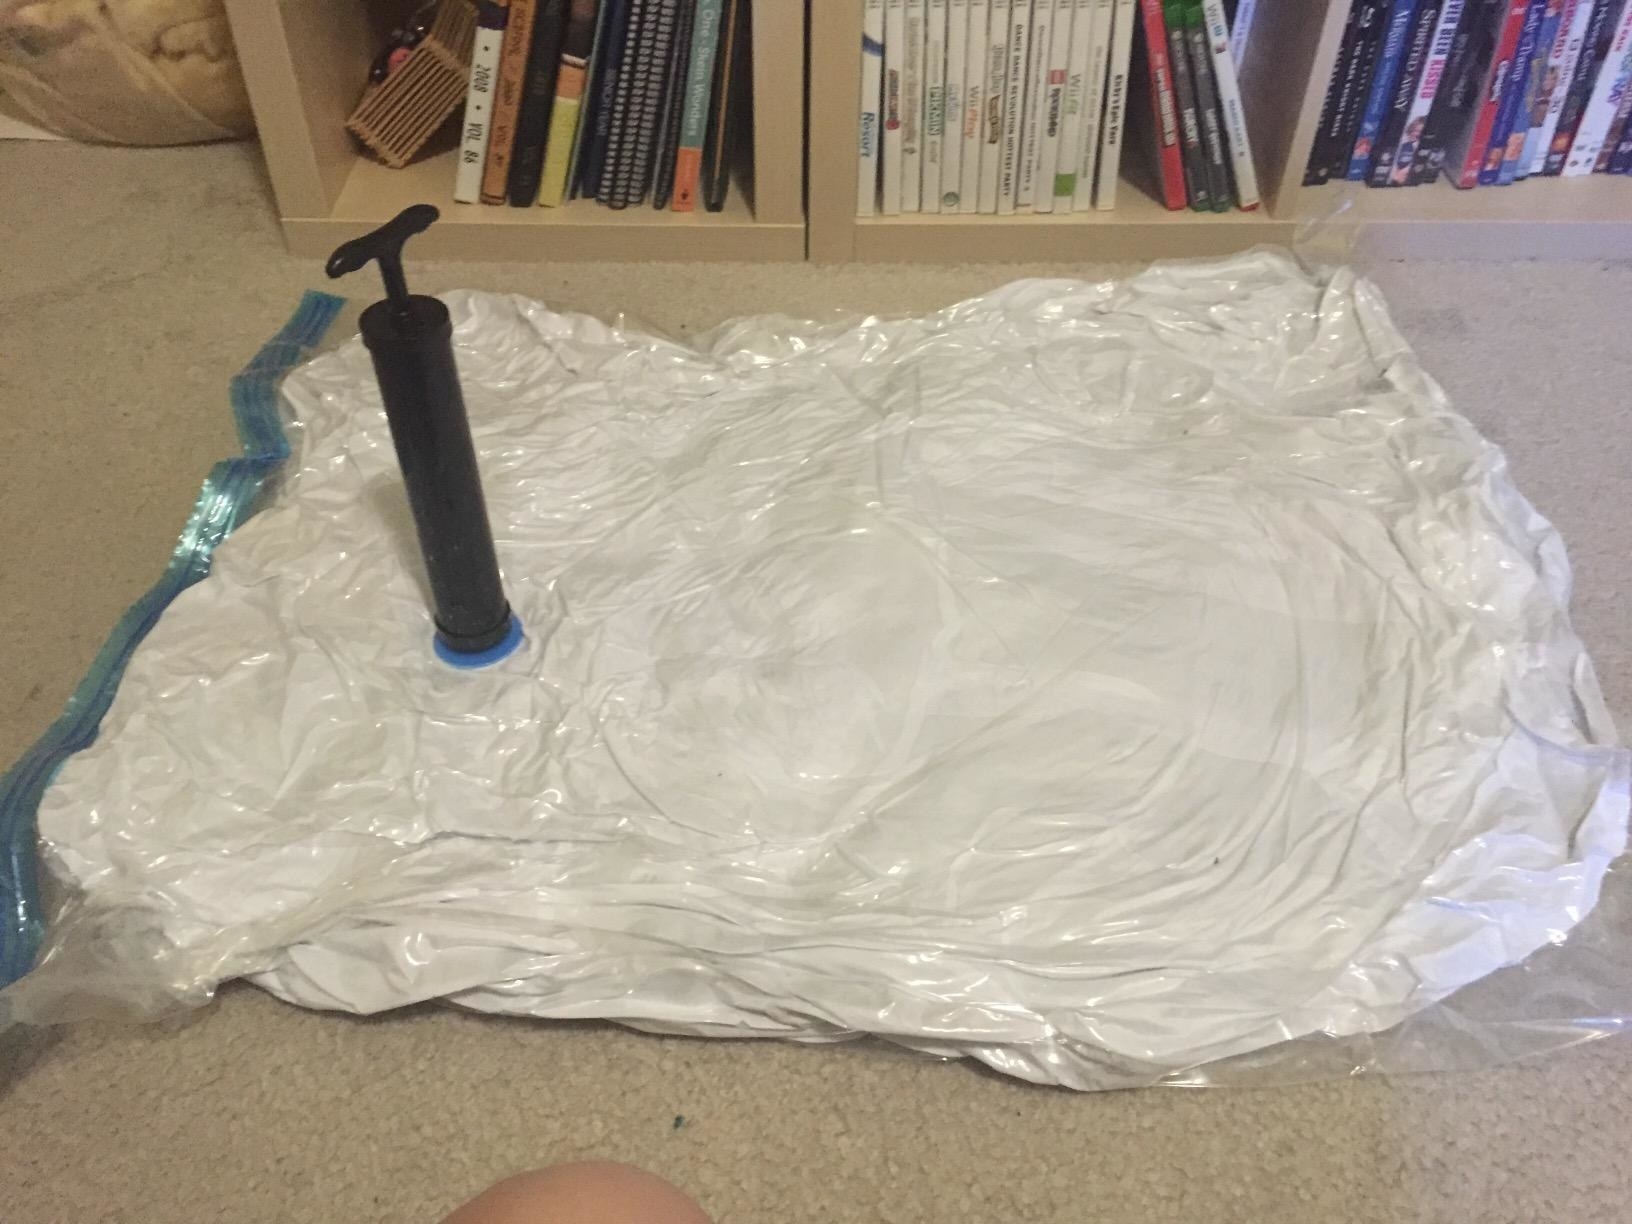 Amazon reviewer showing the hand pump sticking out of a flat jumbo storage bag